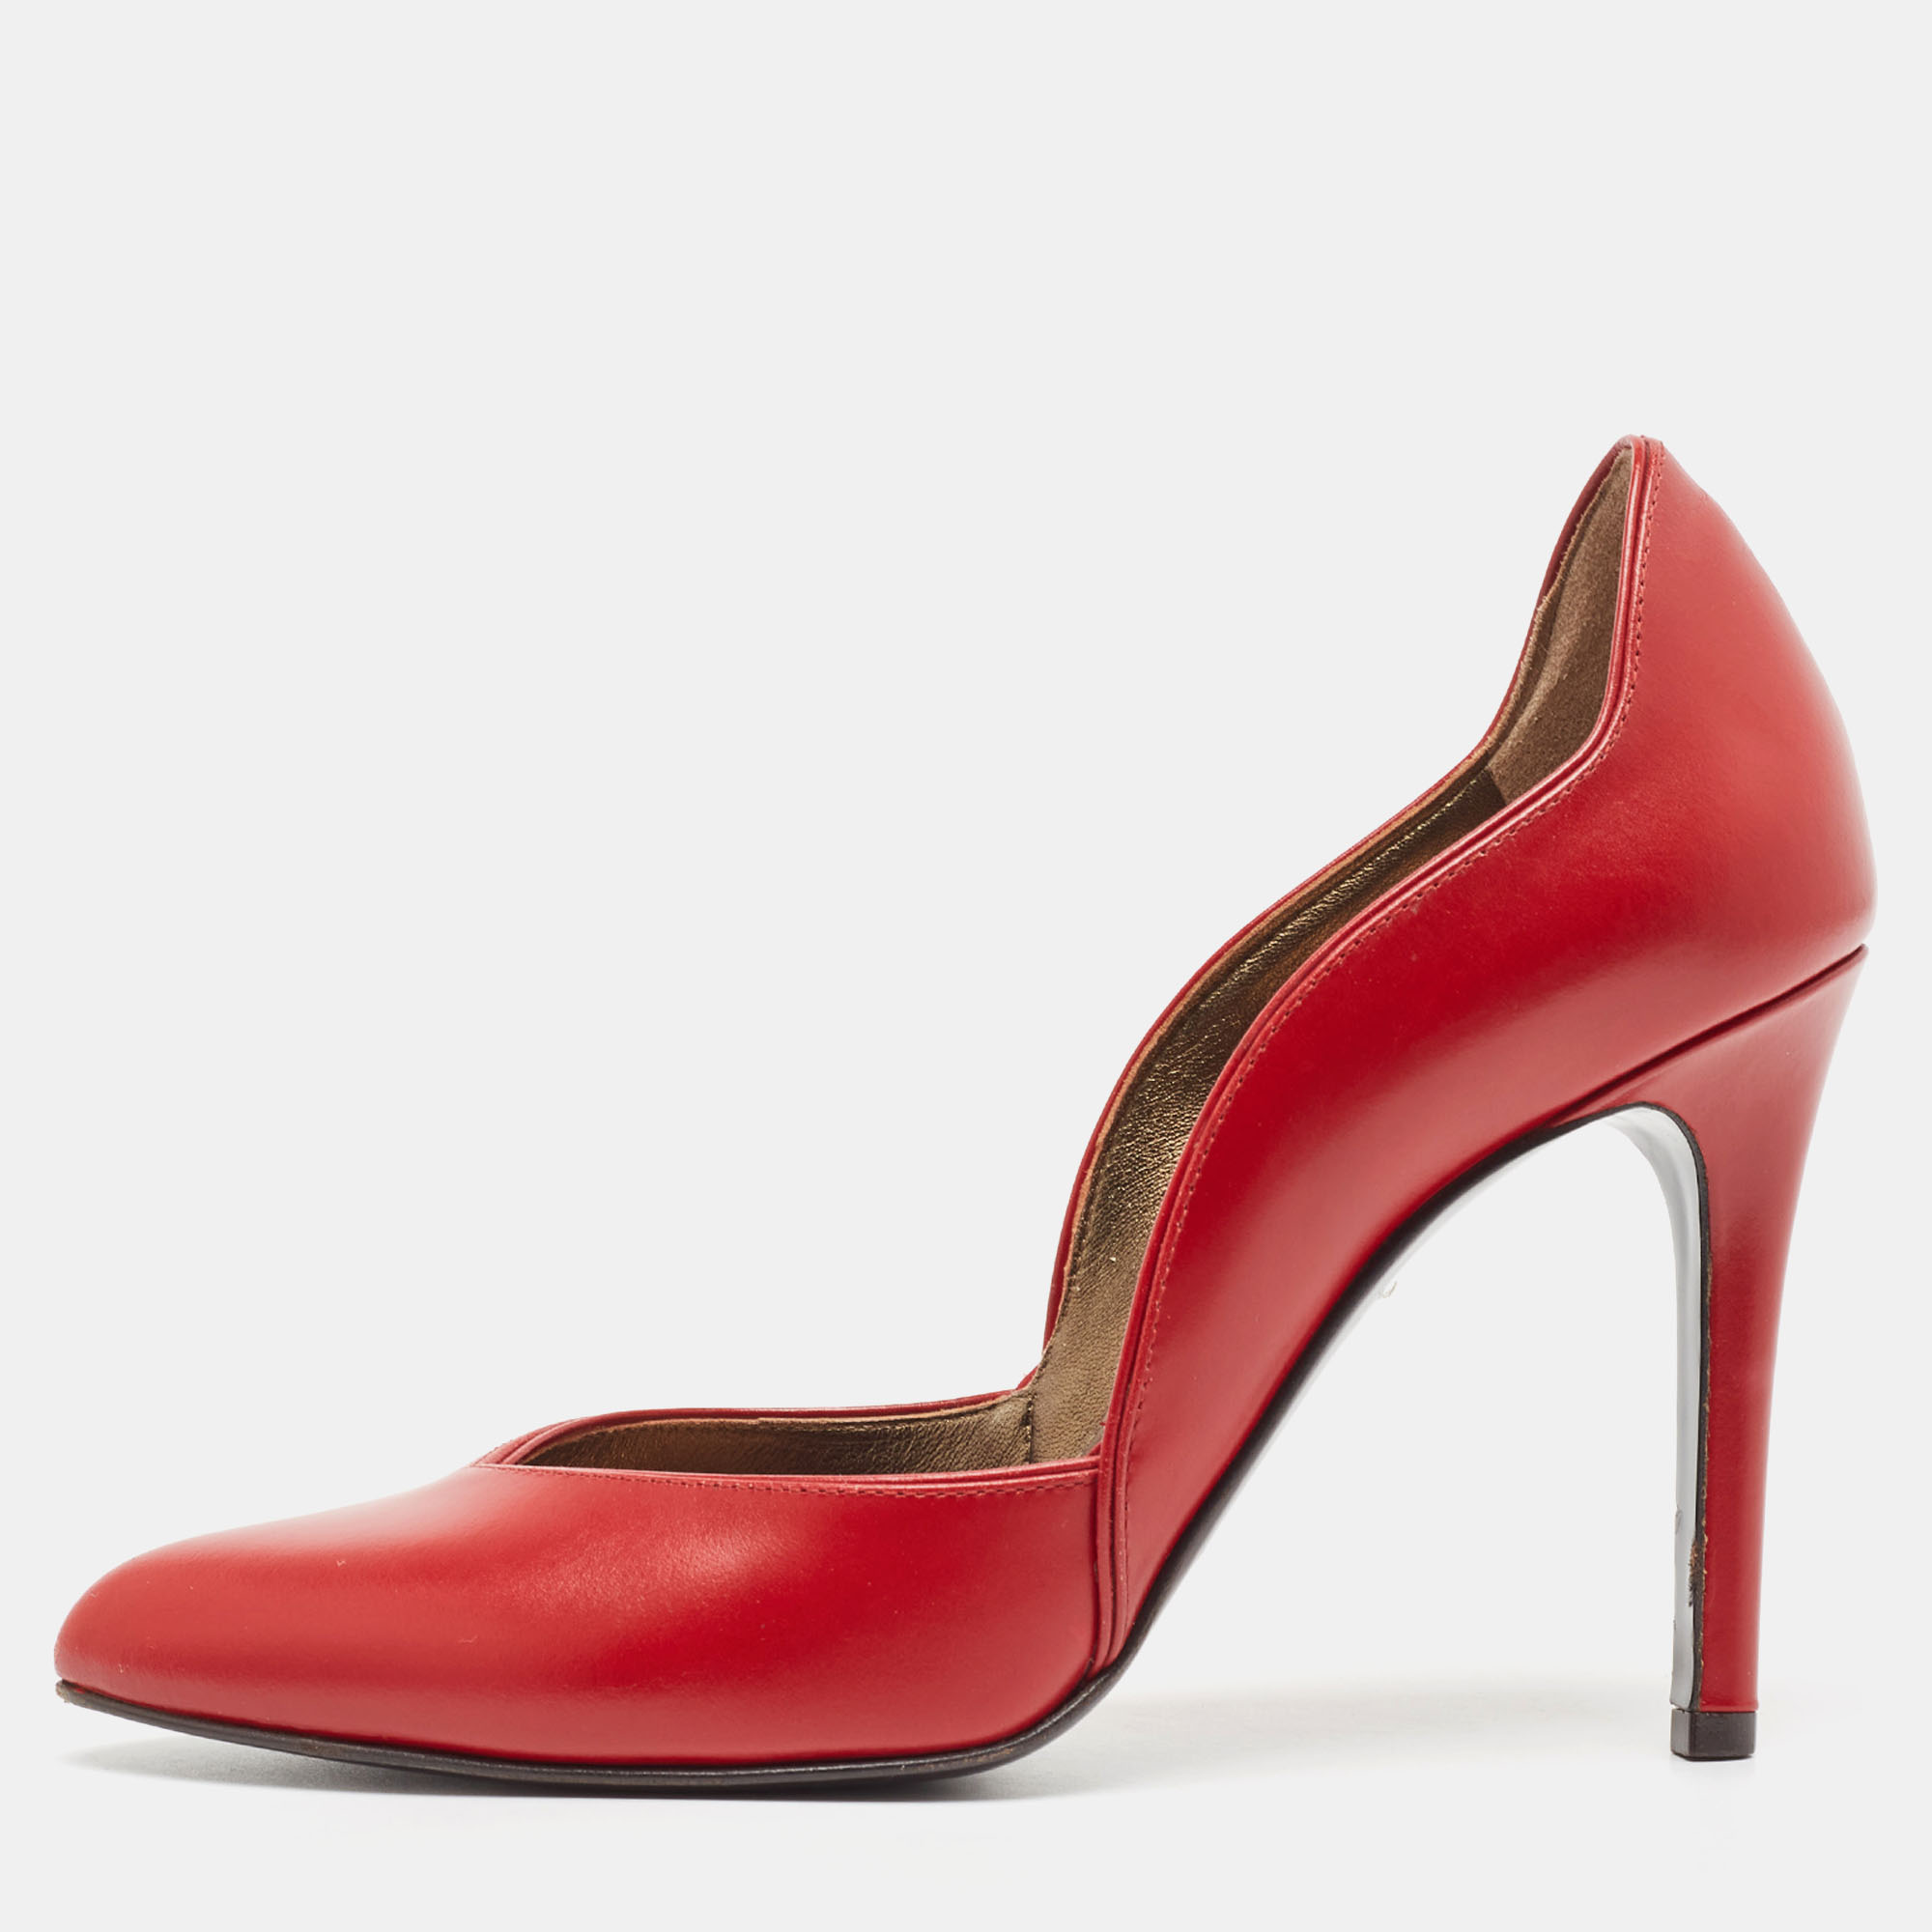 Lanvin red leather pointed toe pumps size 37